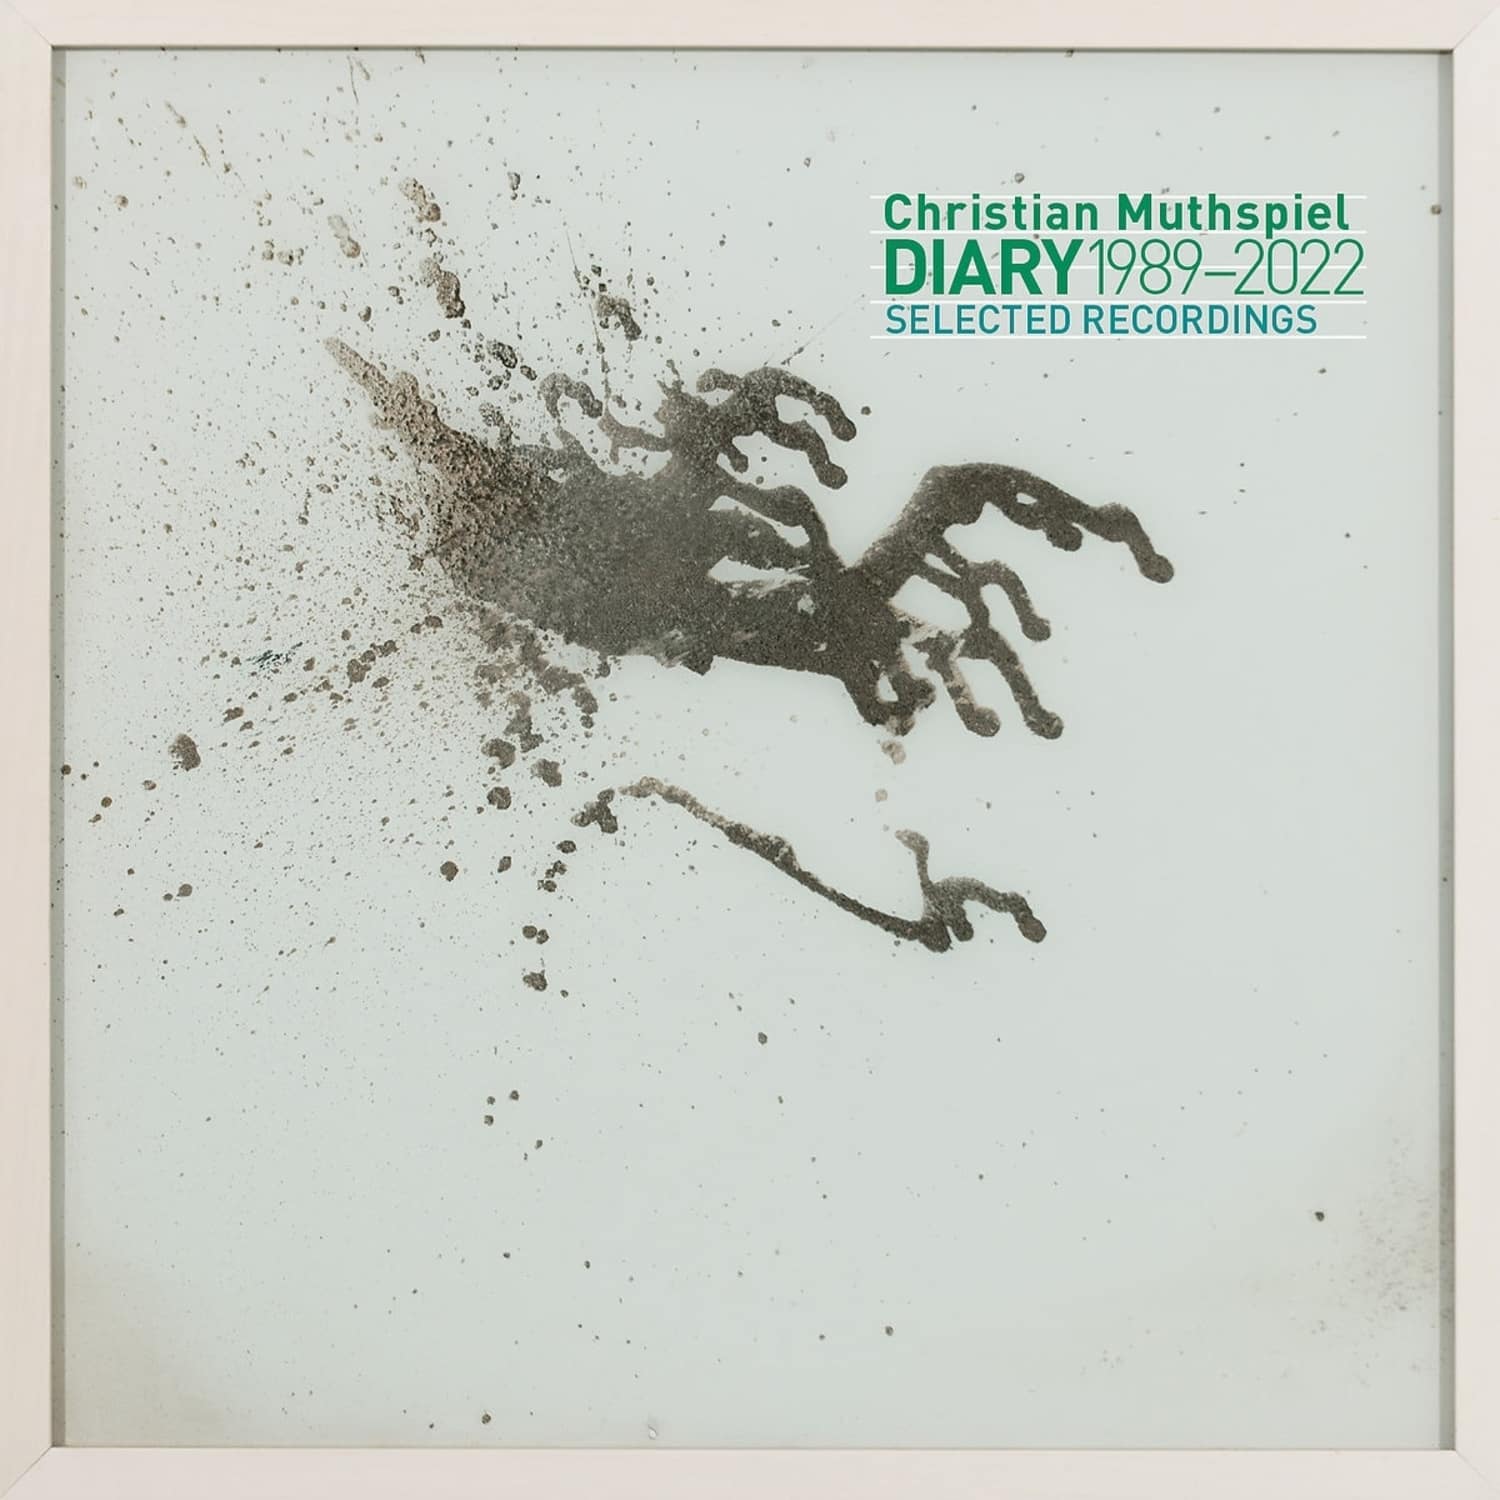 CHRISTIAN MUTHSPIEL - DIARY-SELECTED RECORDINGS 1989-2022 